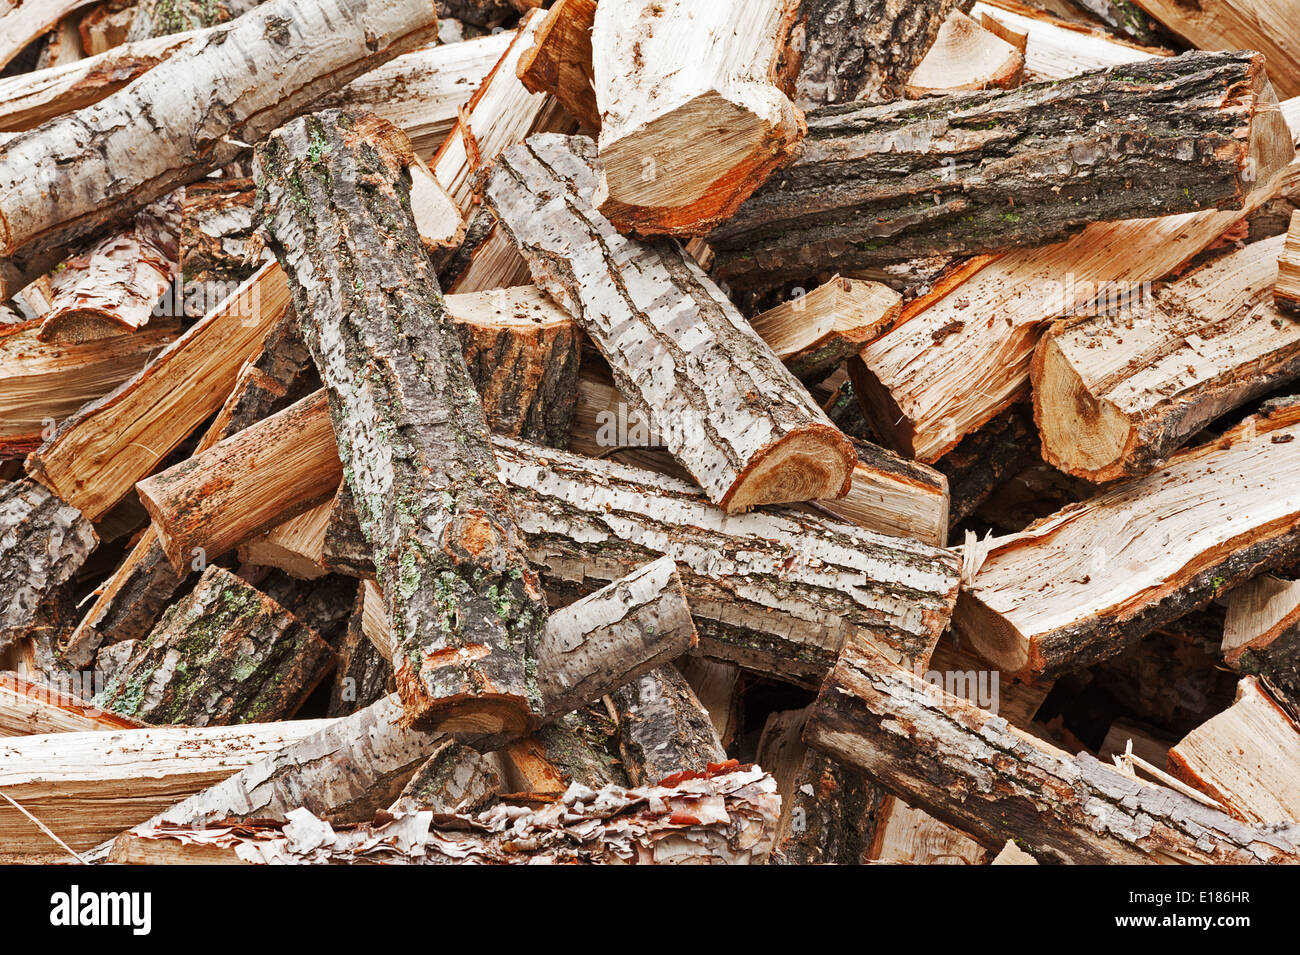 Dry chopped firewood logs in pile. Nature background. Stock Photo